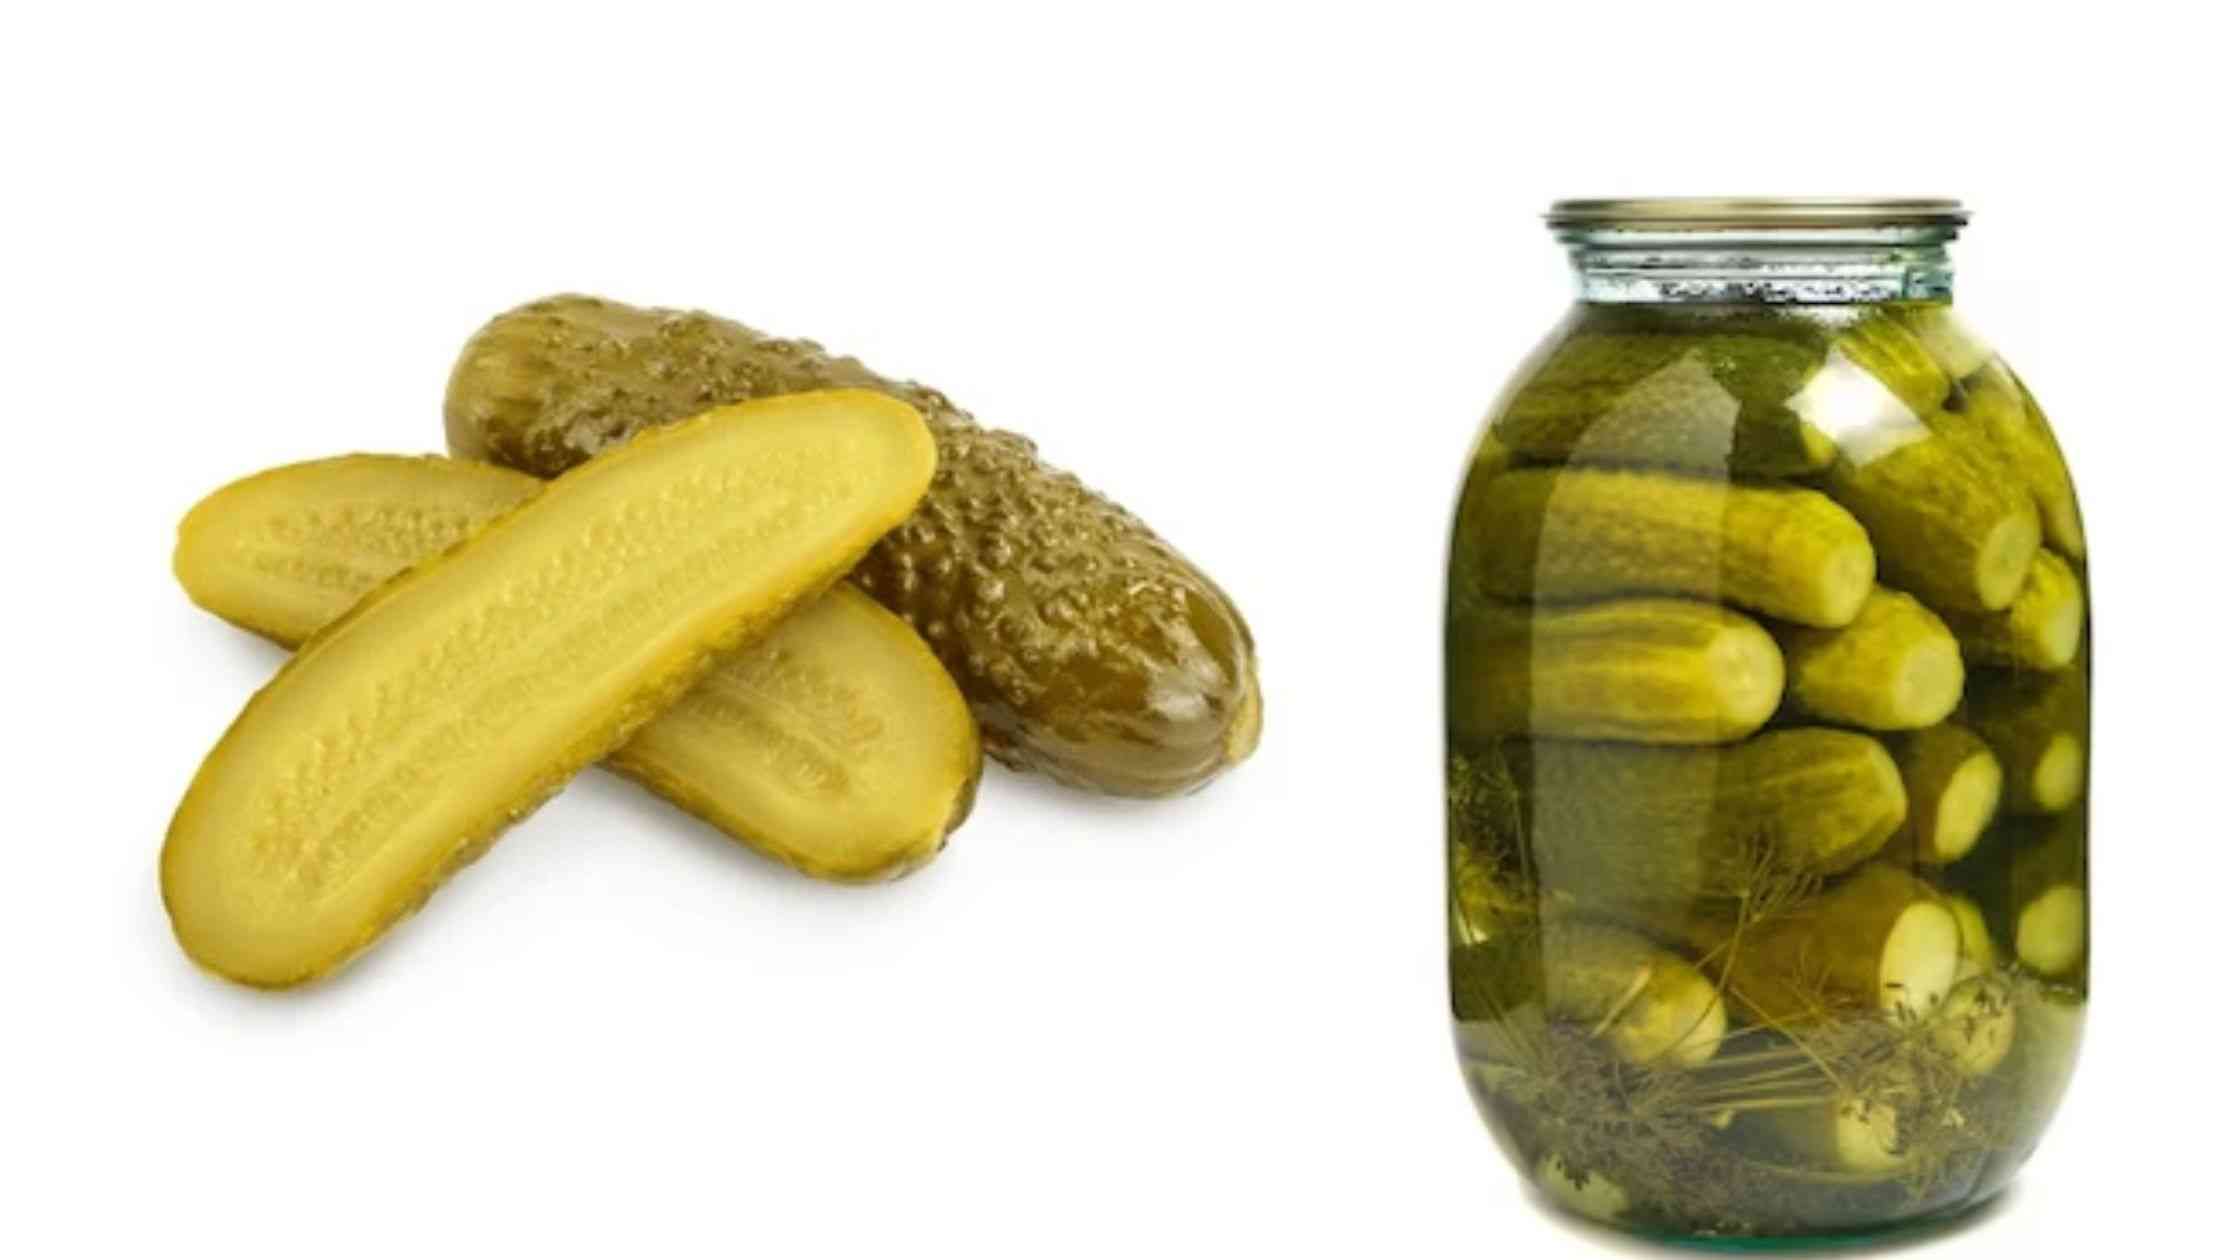 Spiritual Meaning of Smelling Pickles